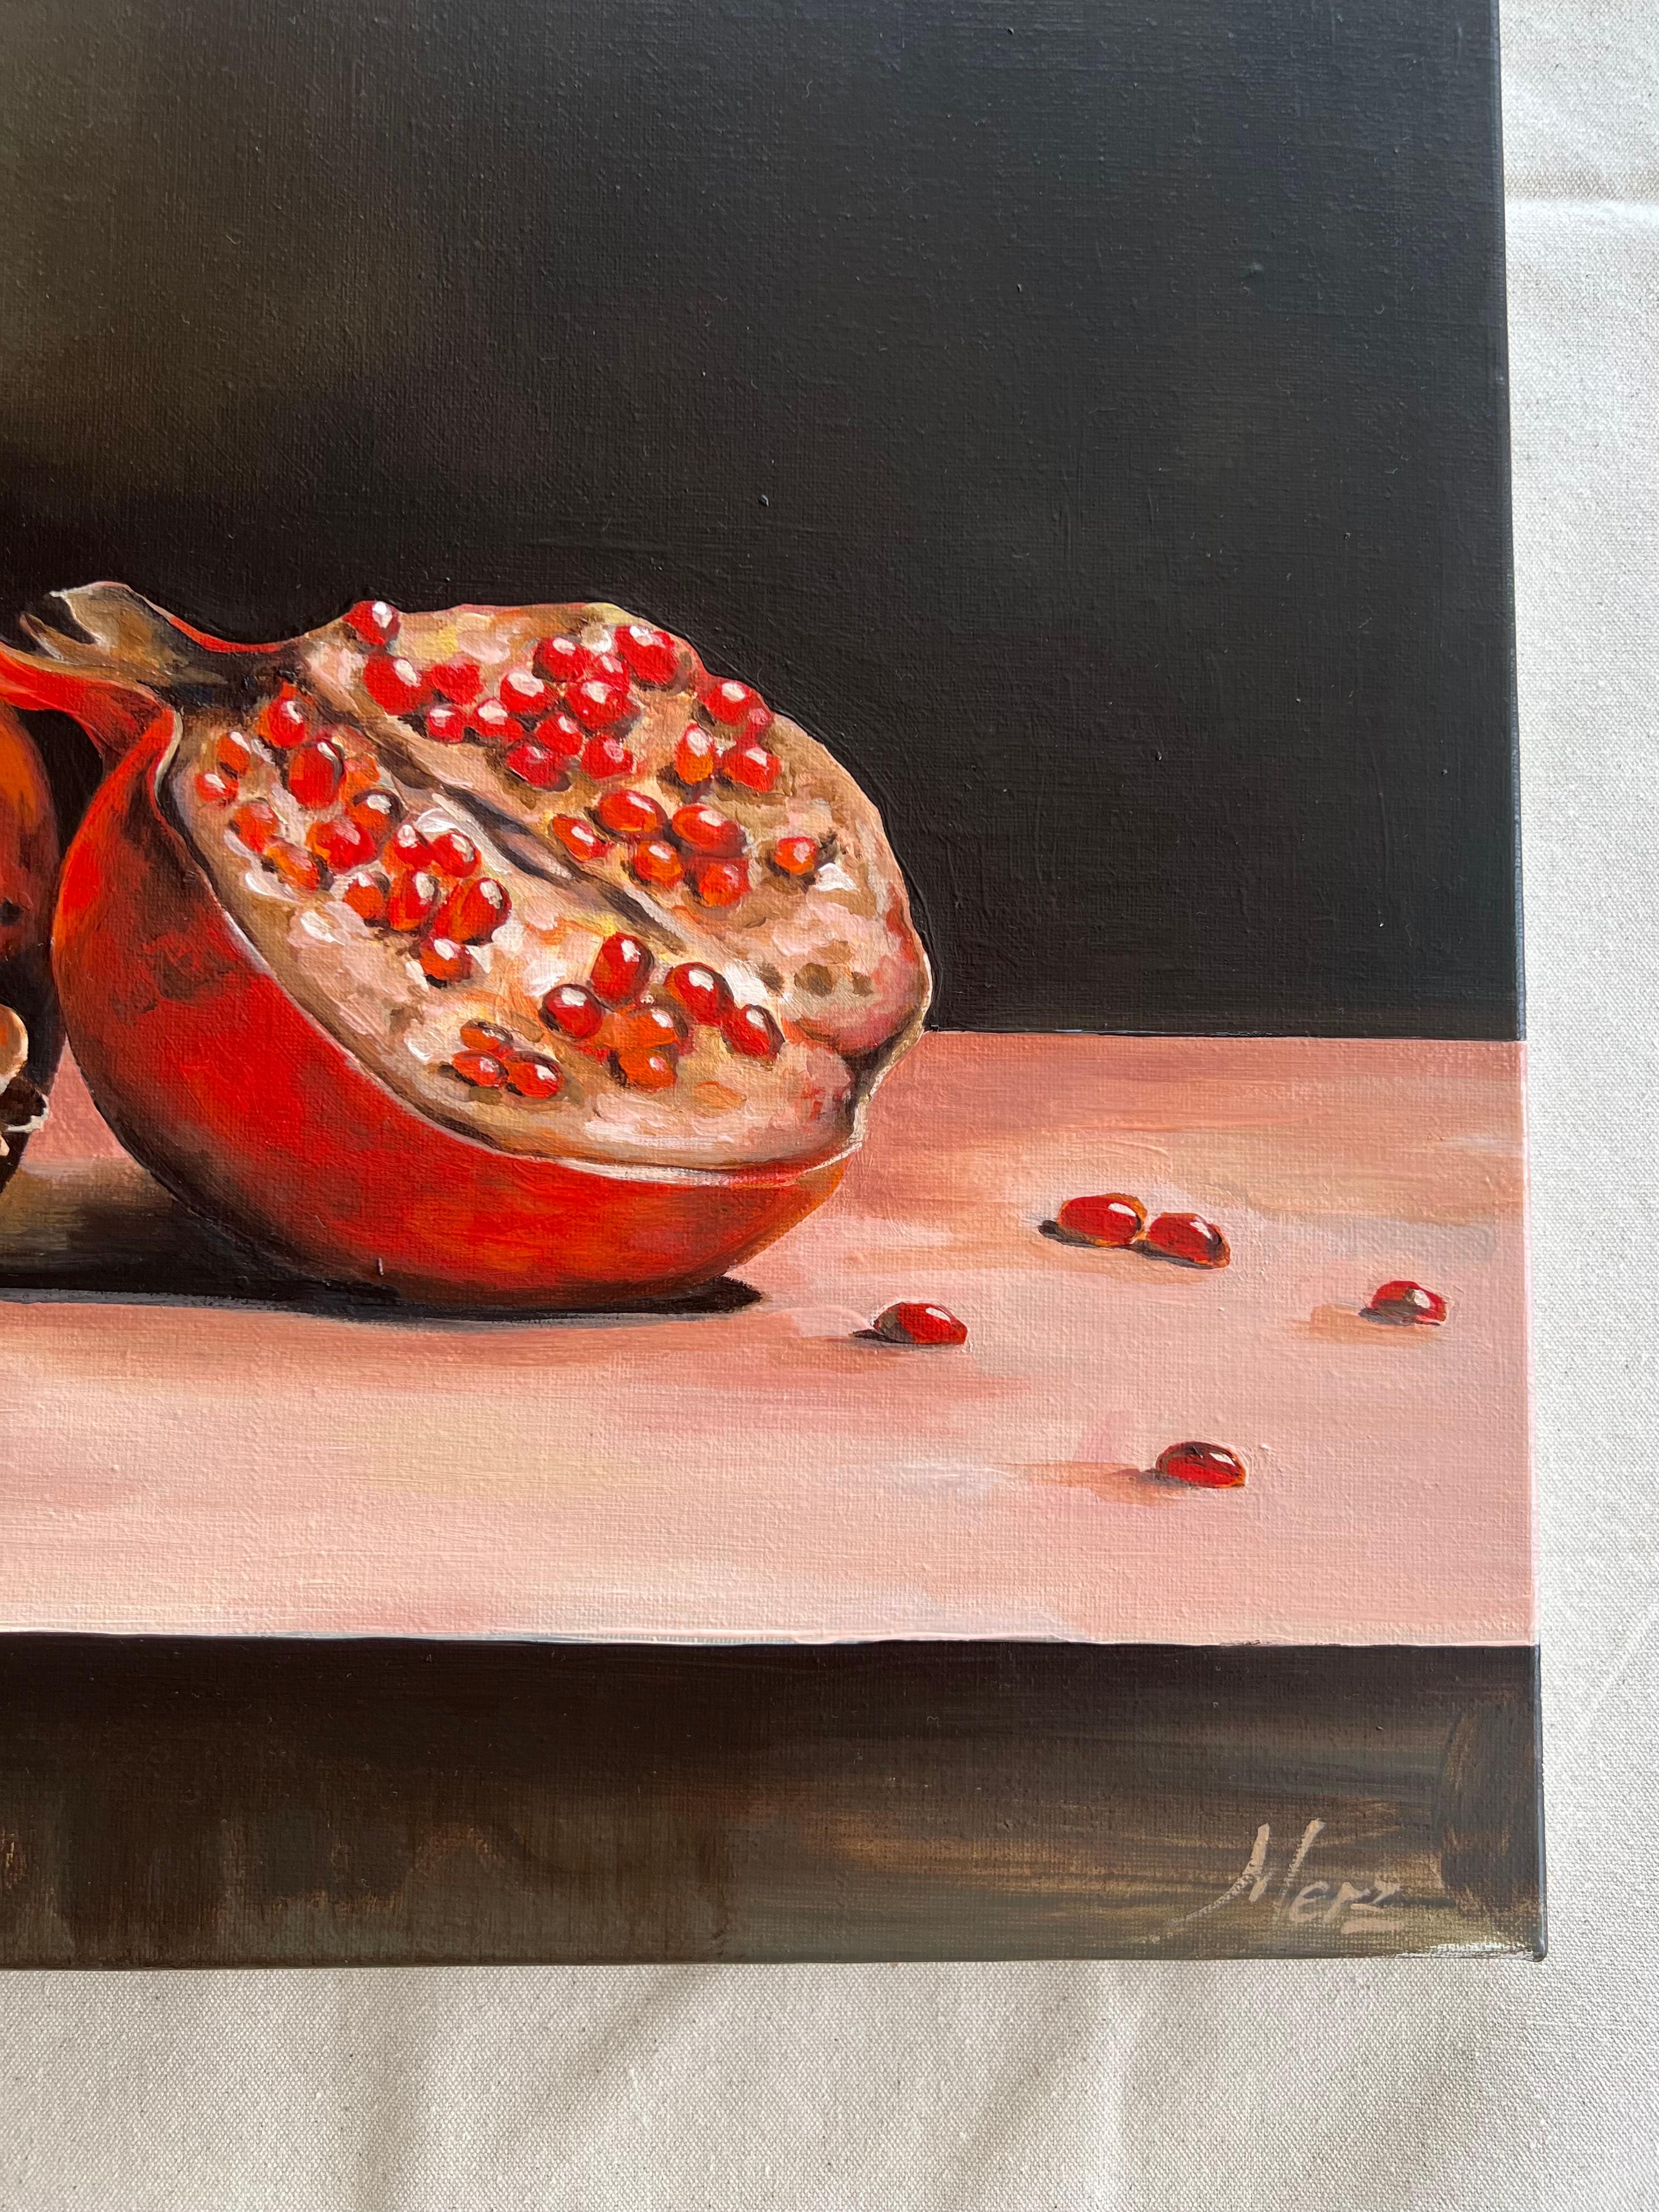 Pomegranates are unusual fruits, “no more than a closet of juicy seeds,” as Jane Grigson describes them.

Poets have been known to compare those seeds to jewels. Cracking open a pomegranate does feel a bit like lifting the lid of a jewelry box, in